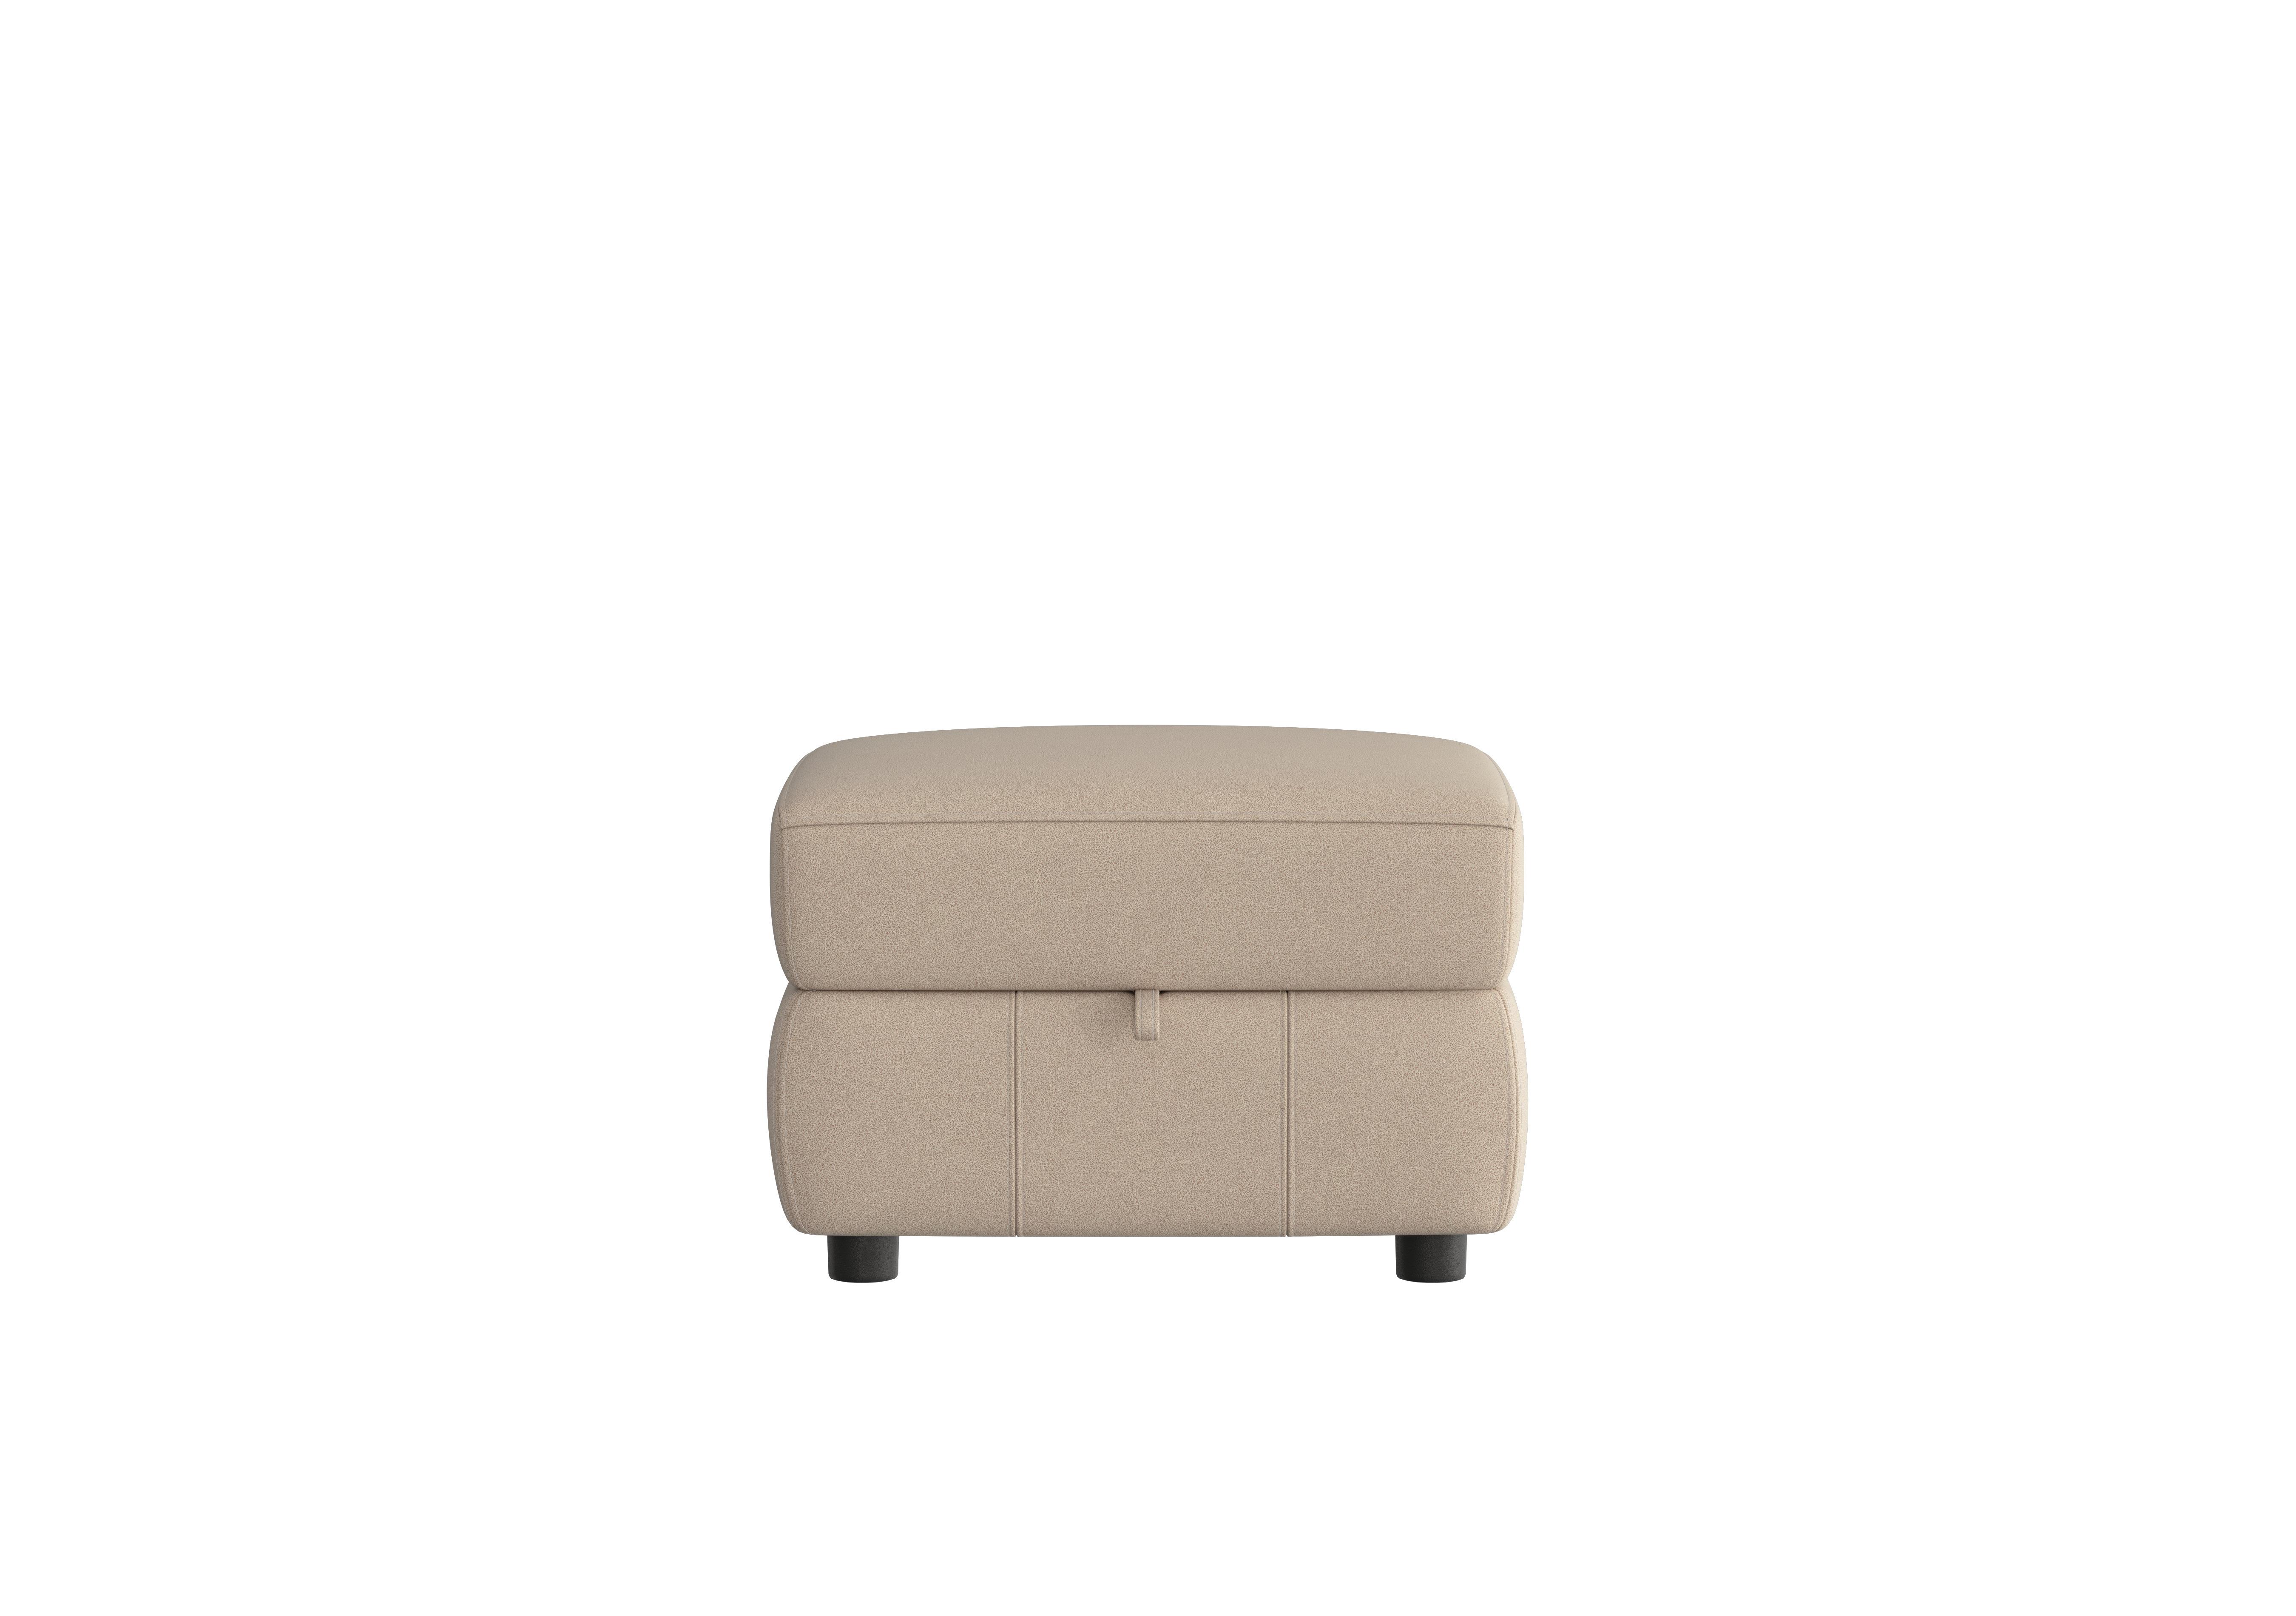 Relax Station Revive Fabric Storage Footstool in Bfa-Blj-R20 Bisque on Furniture Village